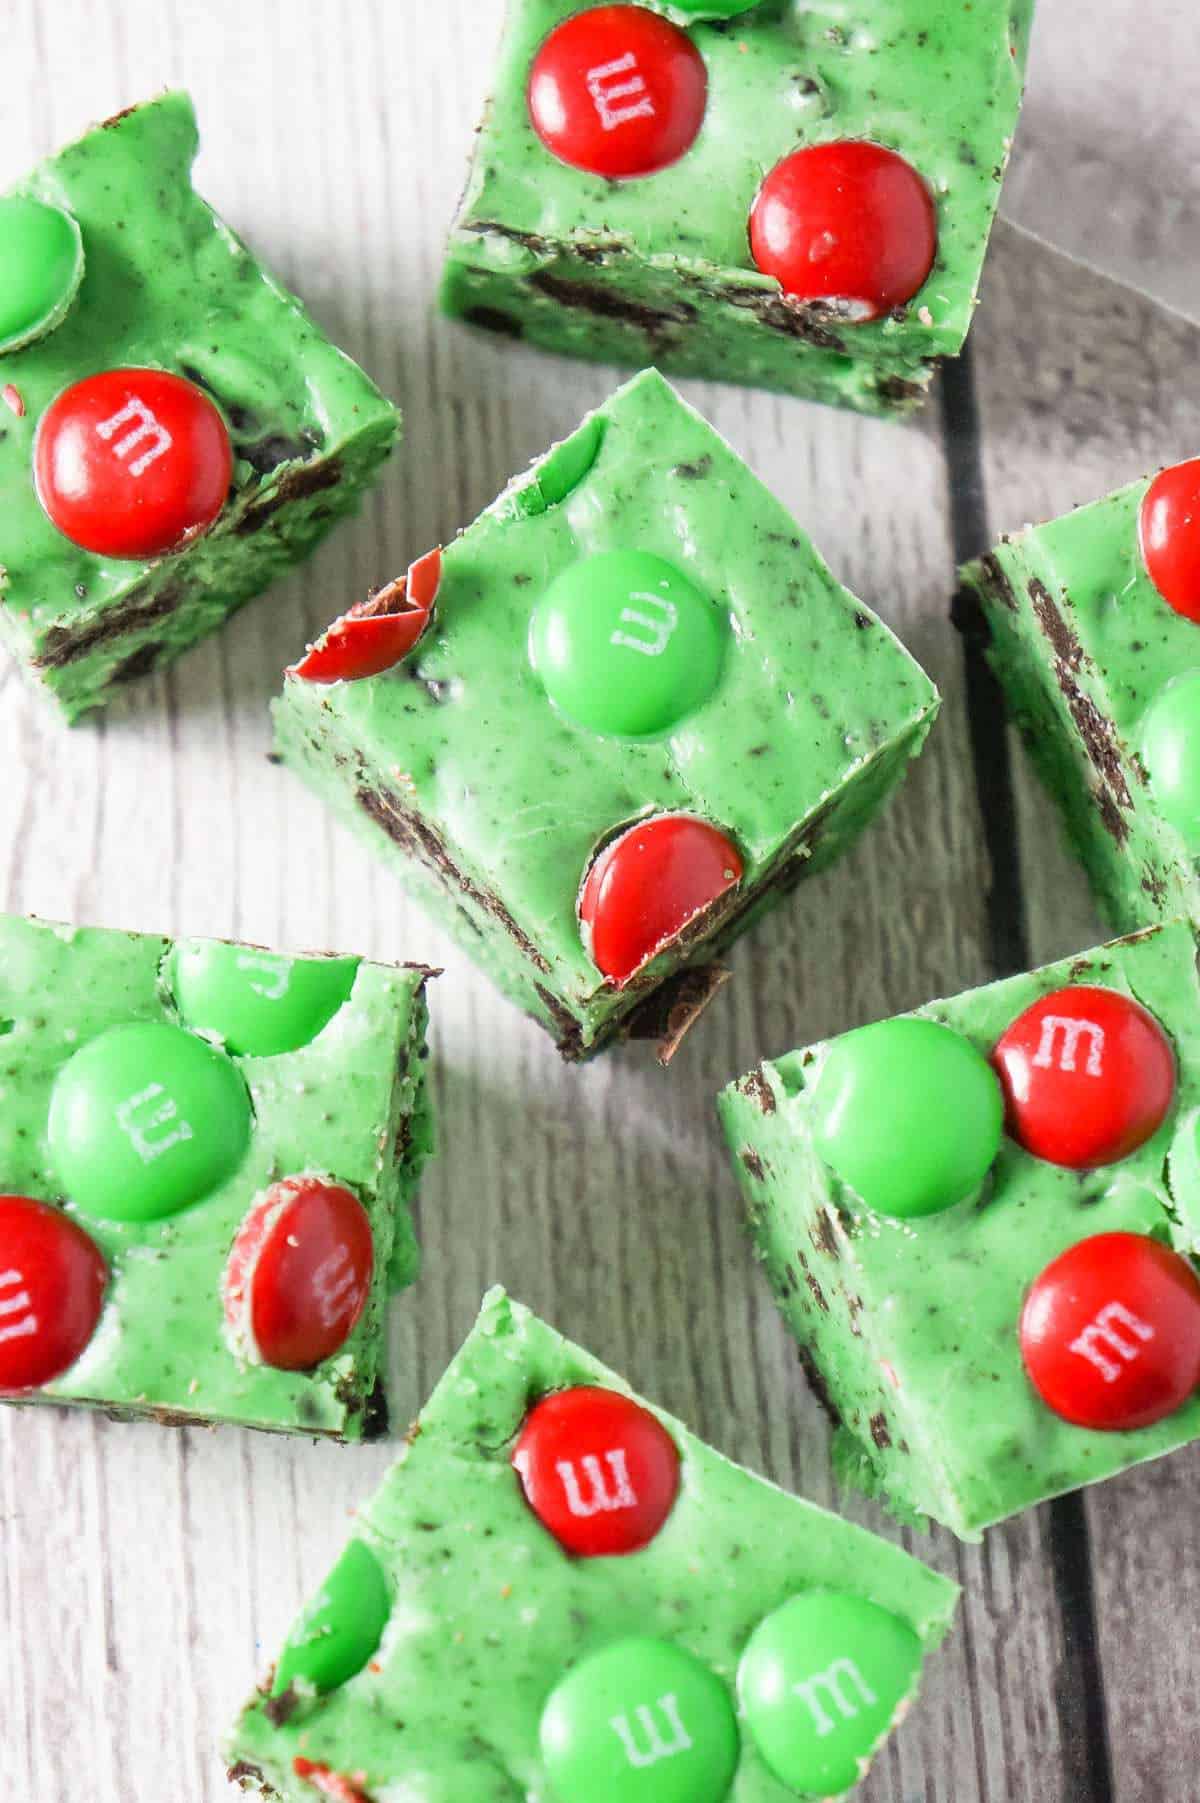 Cookies and Cream Christmas Fudge is an easy microwave fudge recipe made with vanilla frosting, white chocolate chips, green food colouring, crumbled Oreos and topped with red and green M&M's.